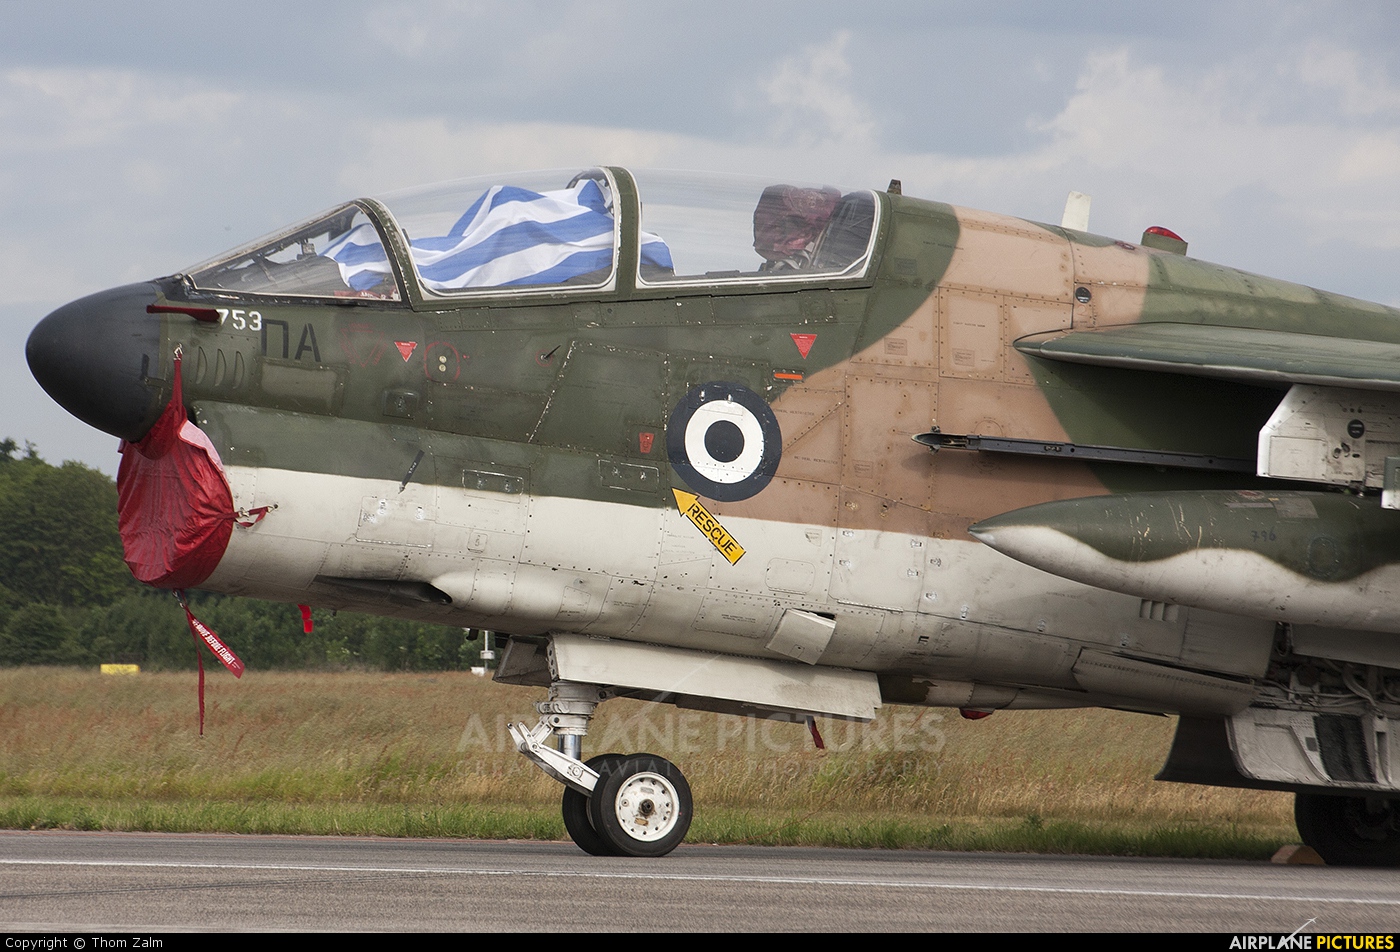 Greece - Hellenic Air Force 156753 aircraft at Uden - Volkel